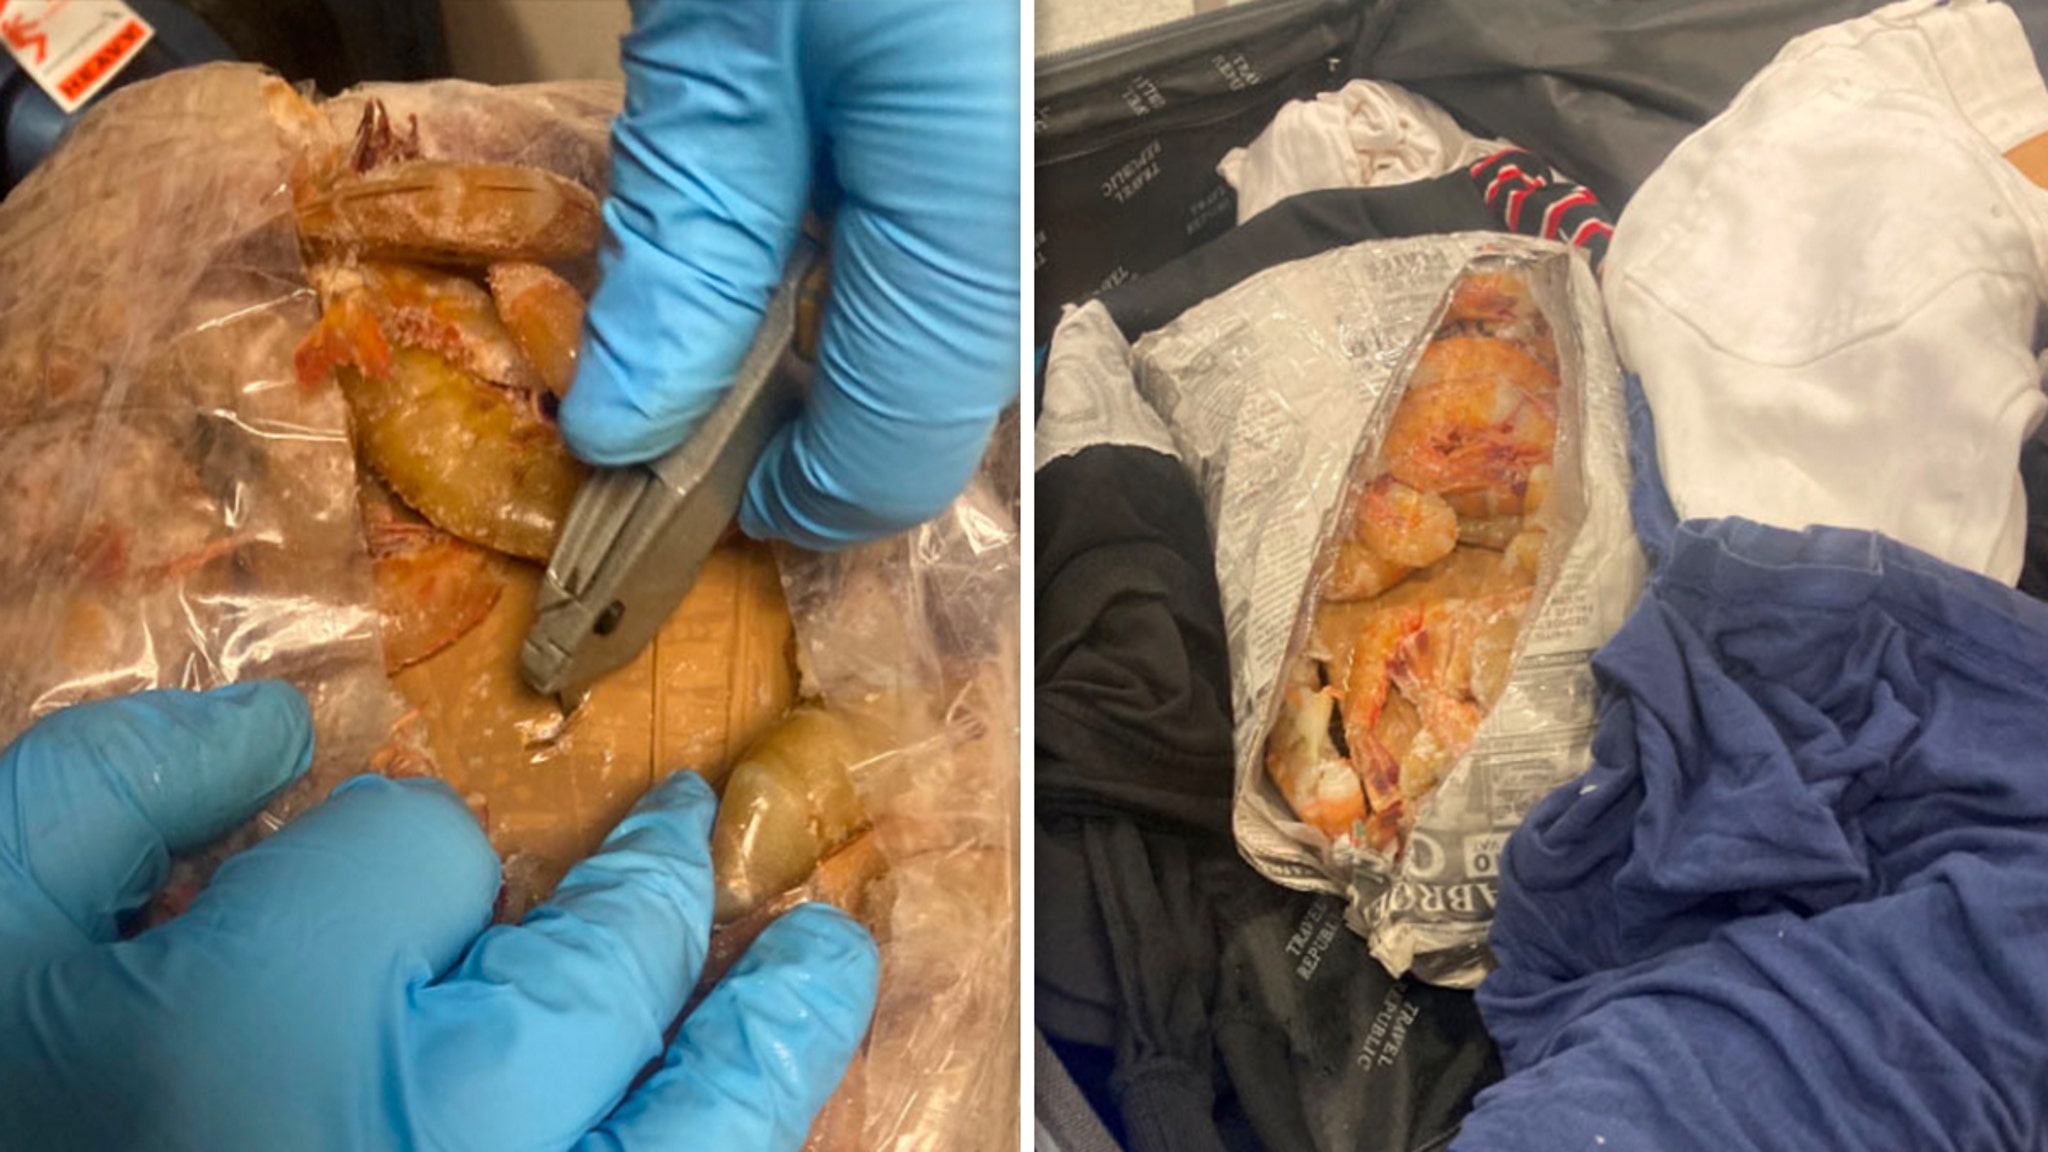 Man Arrested For Allegedly Smuggling Cocaine In Frozen Jumbo Shrimp Bags